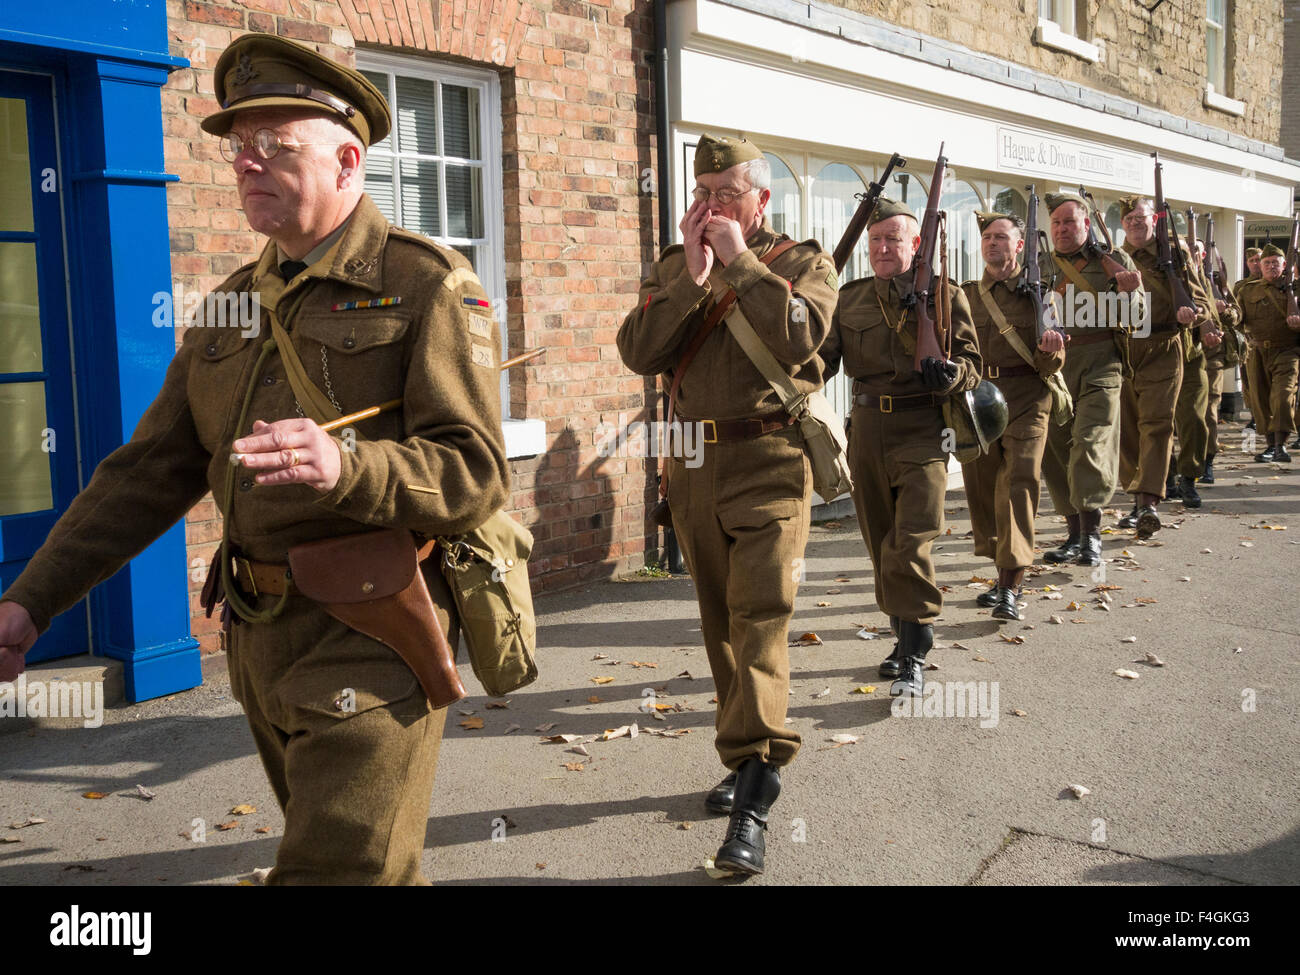 Pickering, North Yorkshire, UK. 17th October, 2015. Pickering`s annual Wartime and 40`s Weekend attracts thousands, with World War 2 living history camps and battle re-enactments amomg the attractions. PICTURED: Home Guard marching through the towng Stock Photo